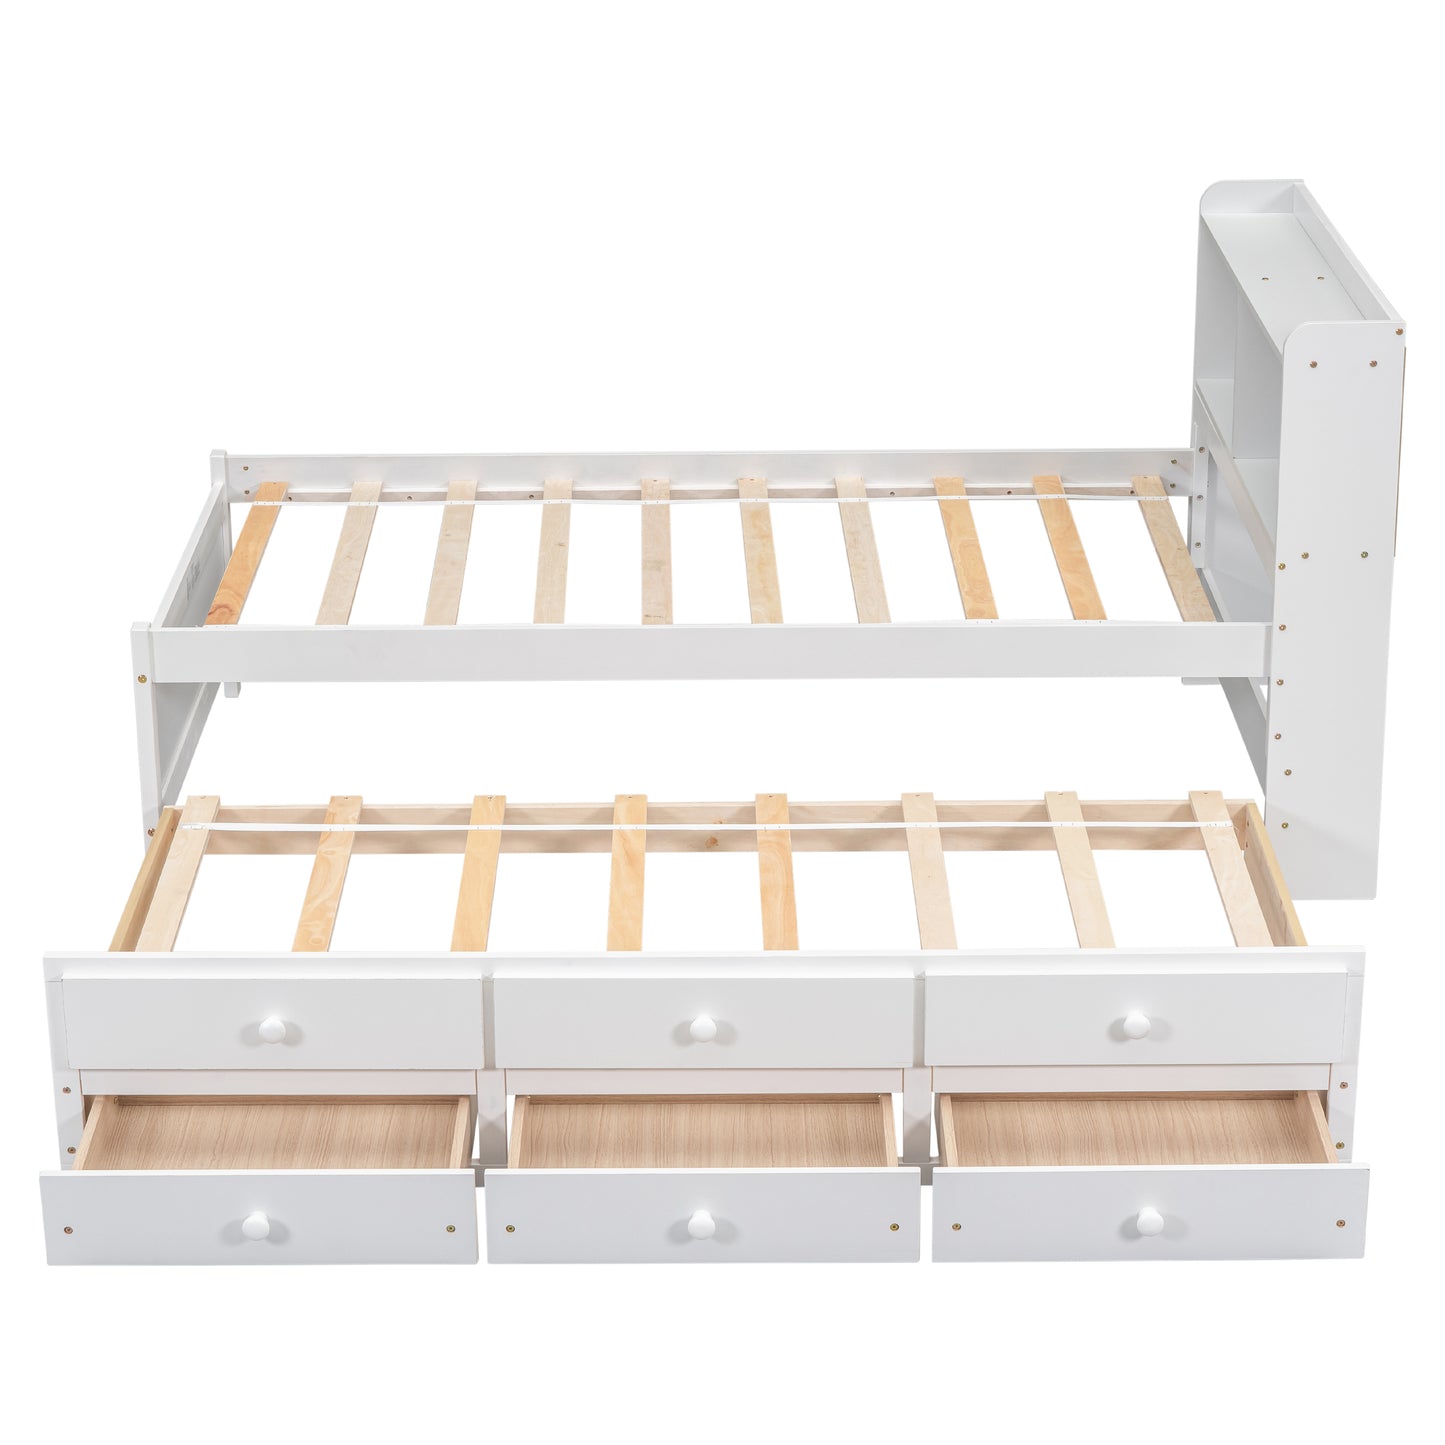 Twin Size Platform Bed with Built-in USB ,Type-C Ports, LED light, Bookcase Headboard, Trundle and 3 Storage Drawers, White